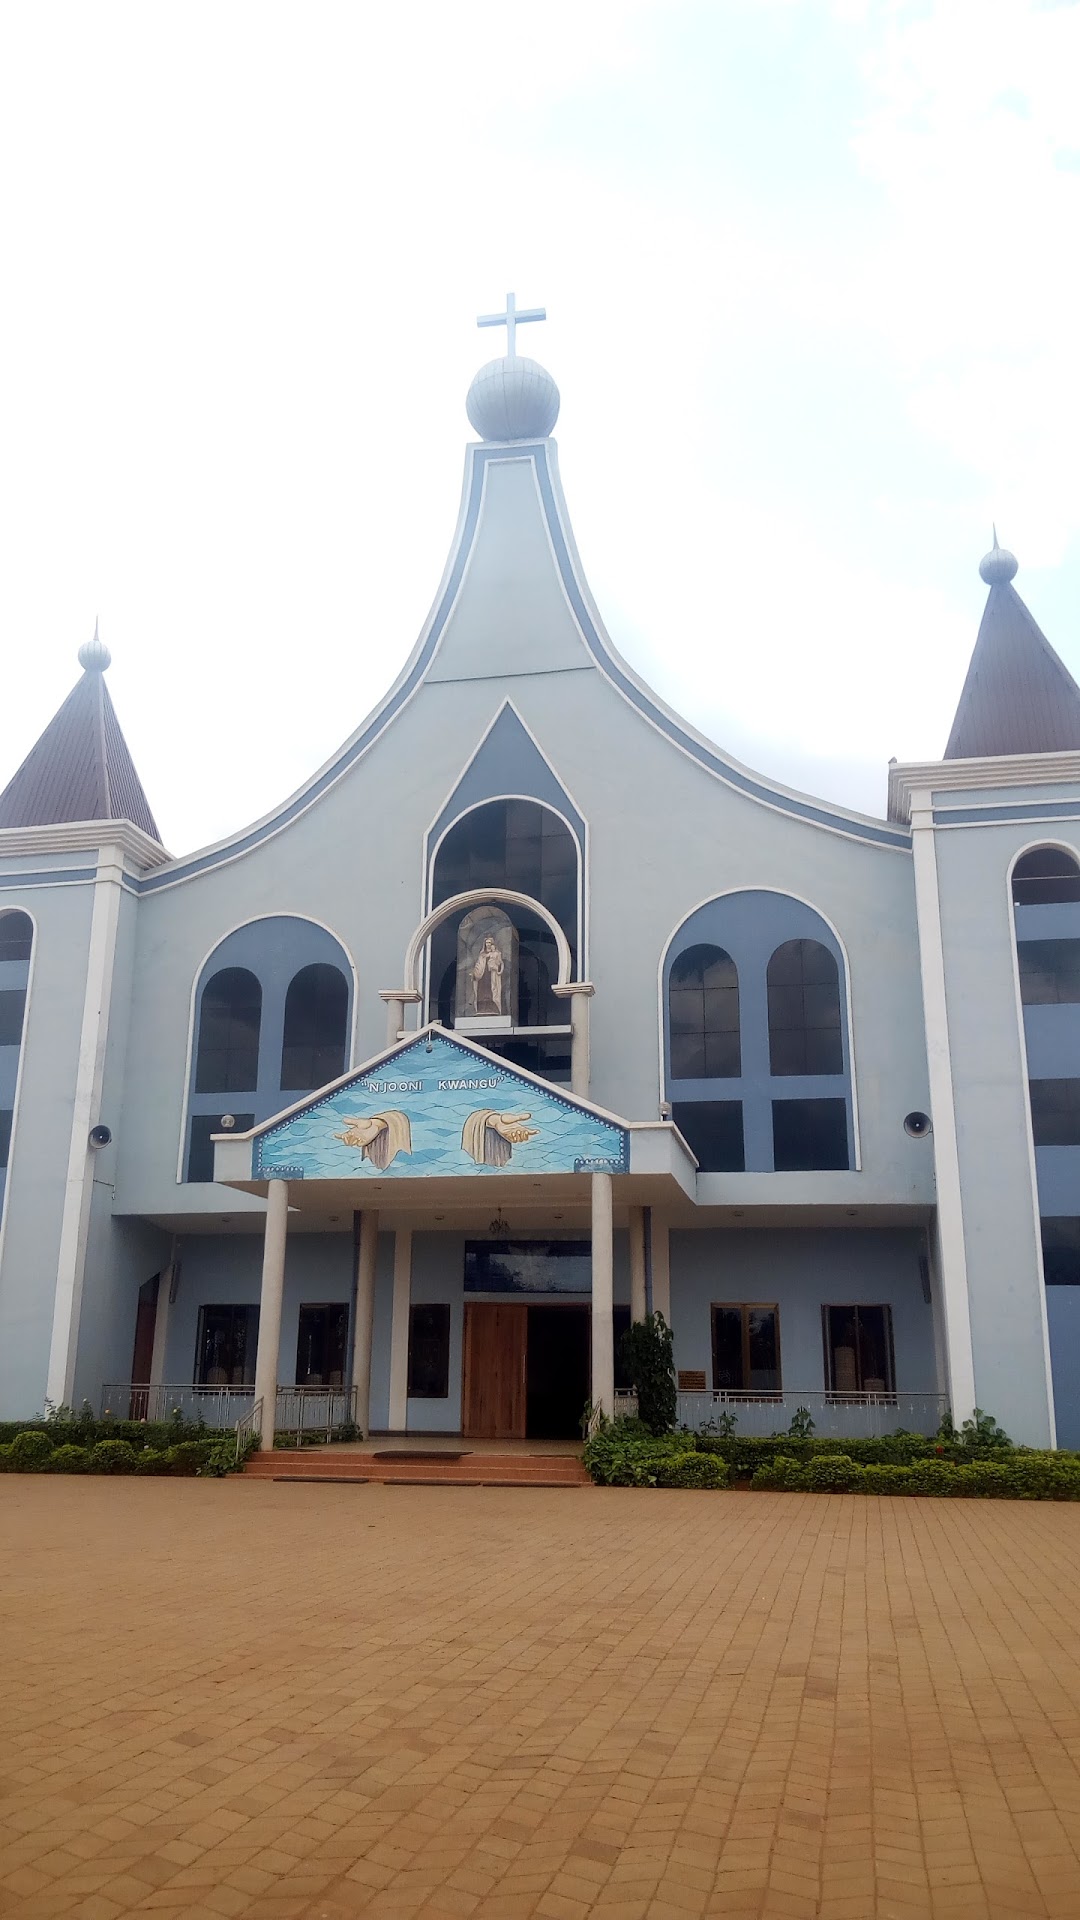 Shrine of Our Lady of Mount Carmel